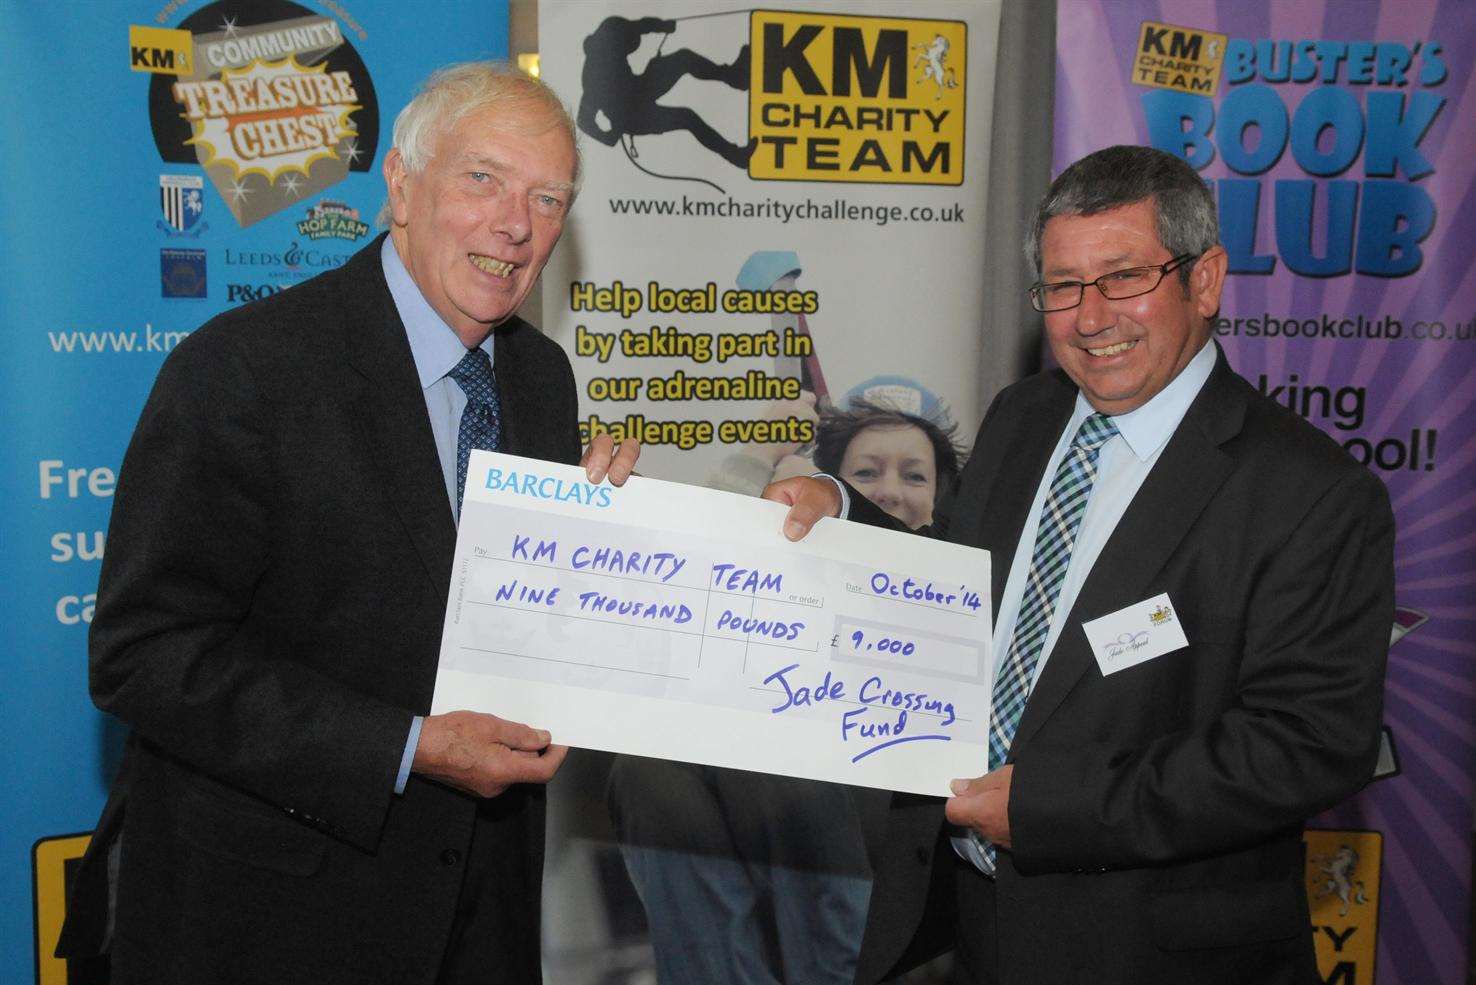 Tim Fleck of the Jade Crossing Fund (right) presents Martin Vye of the KM Charity Team with a £9,000 cheque for the KM Walk to School campaign at the KM Charity Team Forum 2014